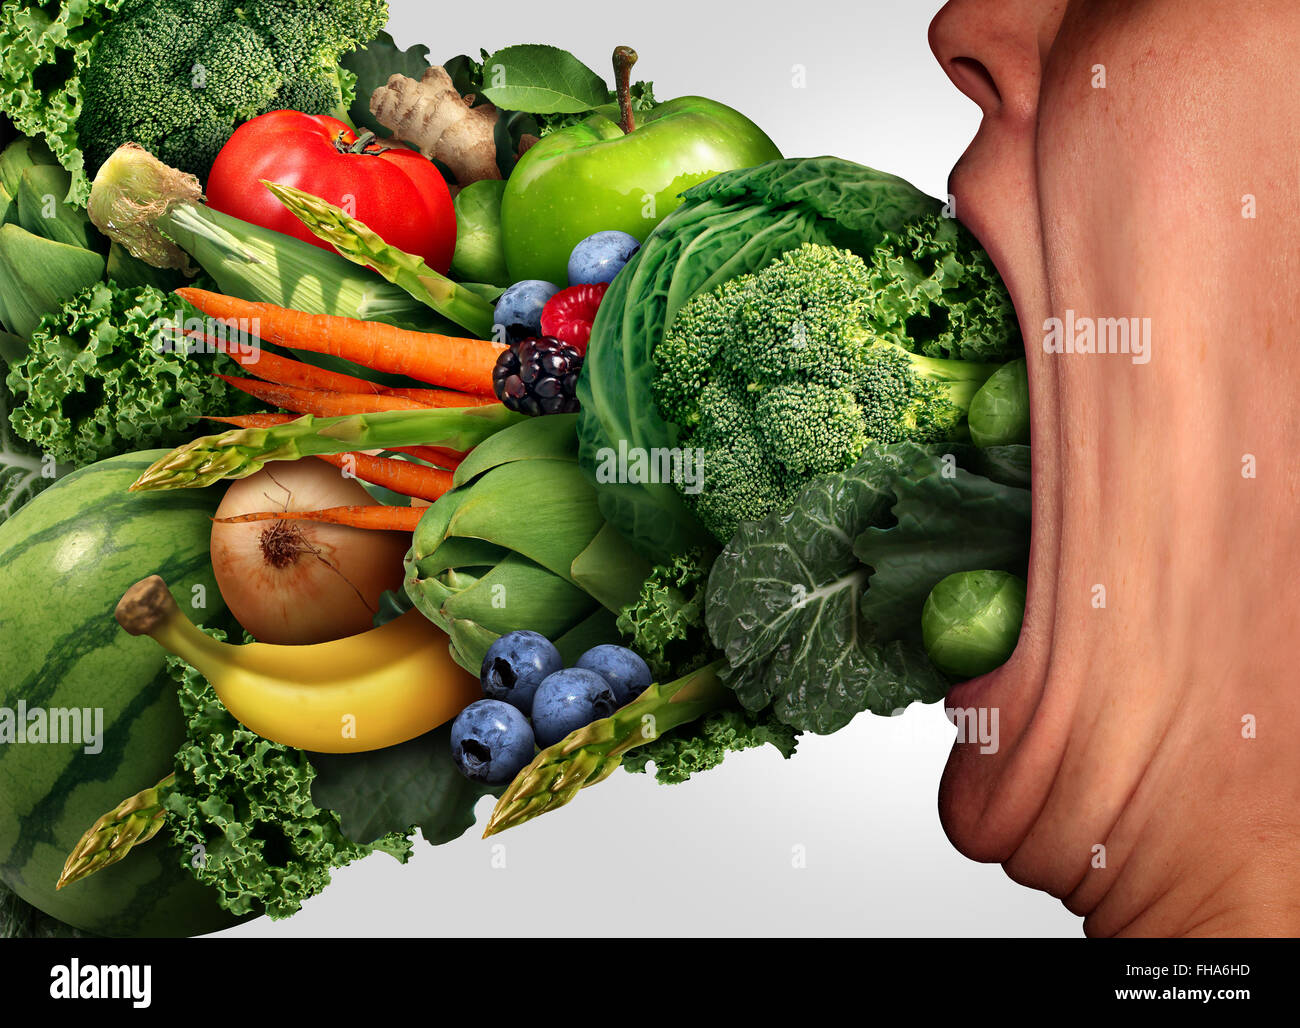 Eat healthy nutrition concept as a person with a wide open stretched mouth eating fresh fruits and vegetables as a health and fitness lifestyle symbol. Stock Photo